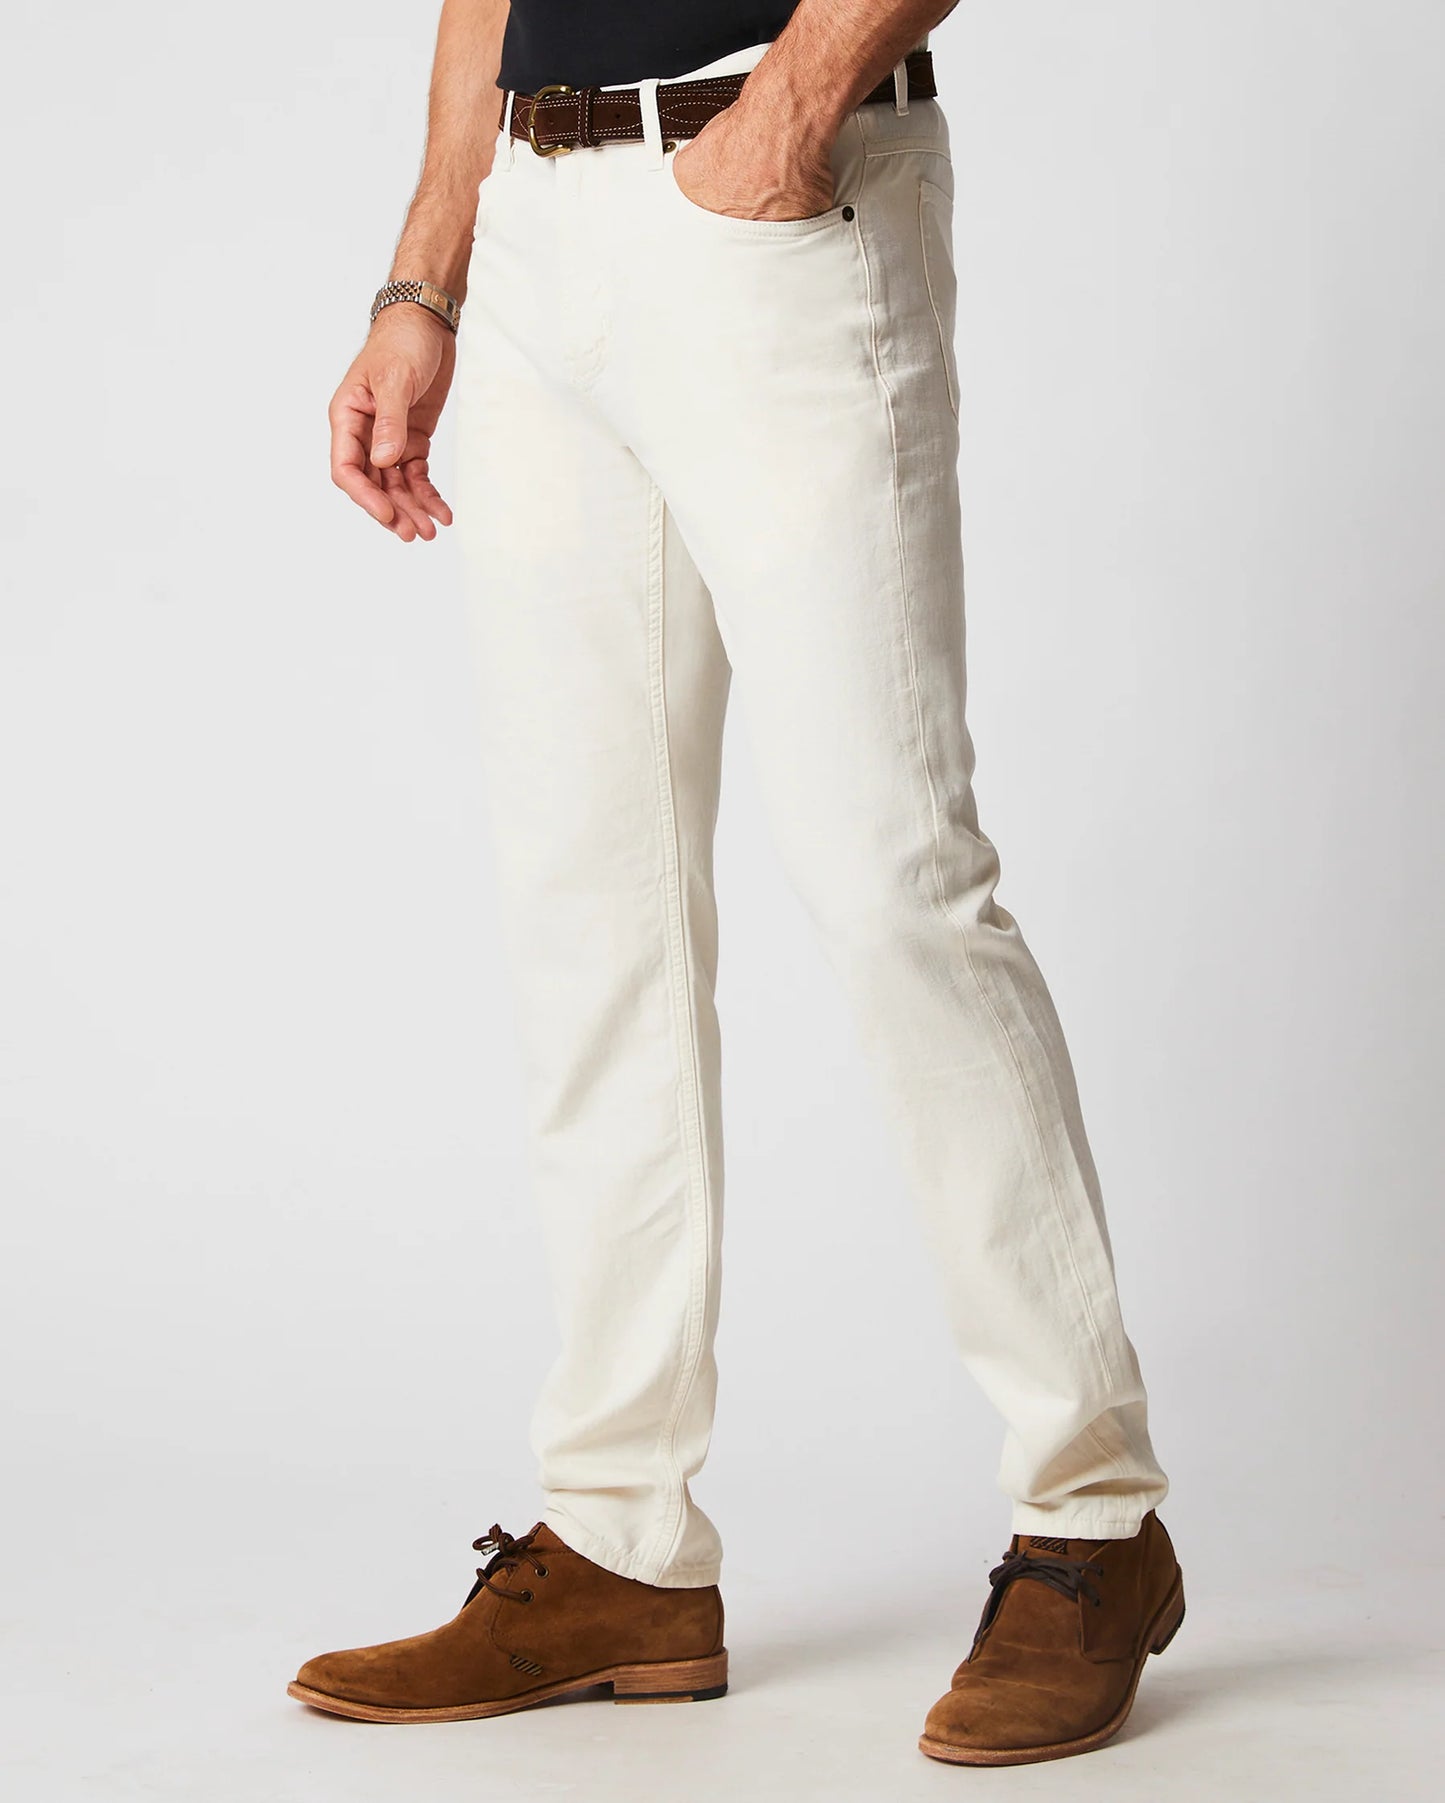 Front view of the Billy Reid Cotton Linen 5 Pocket Pant in the color Eggshell